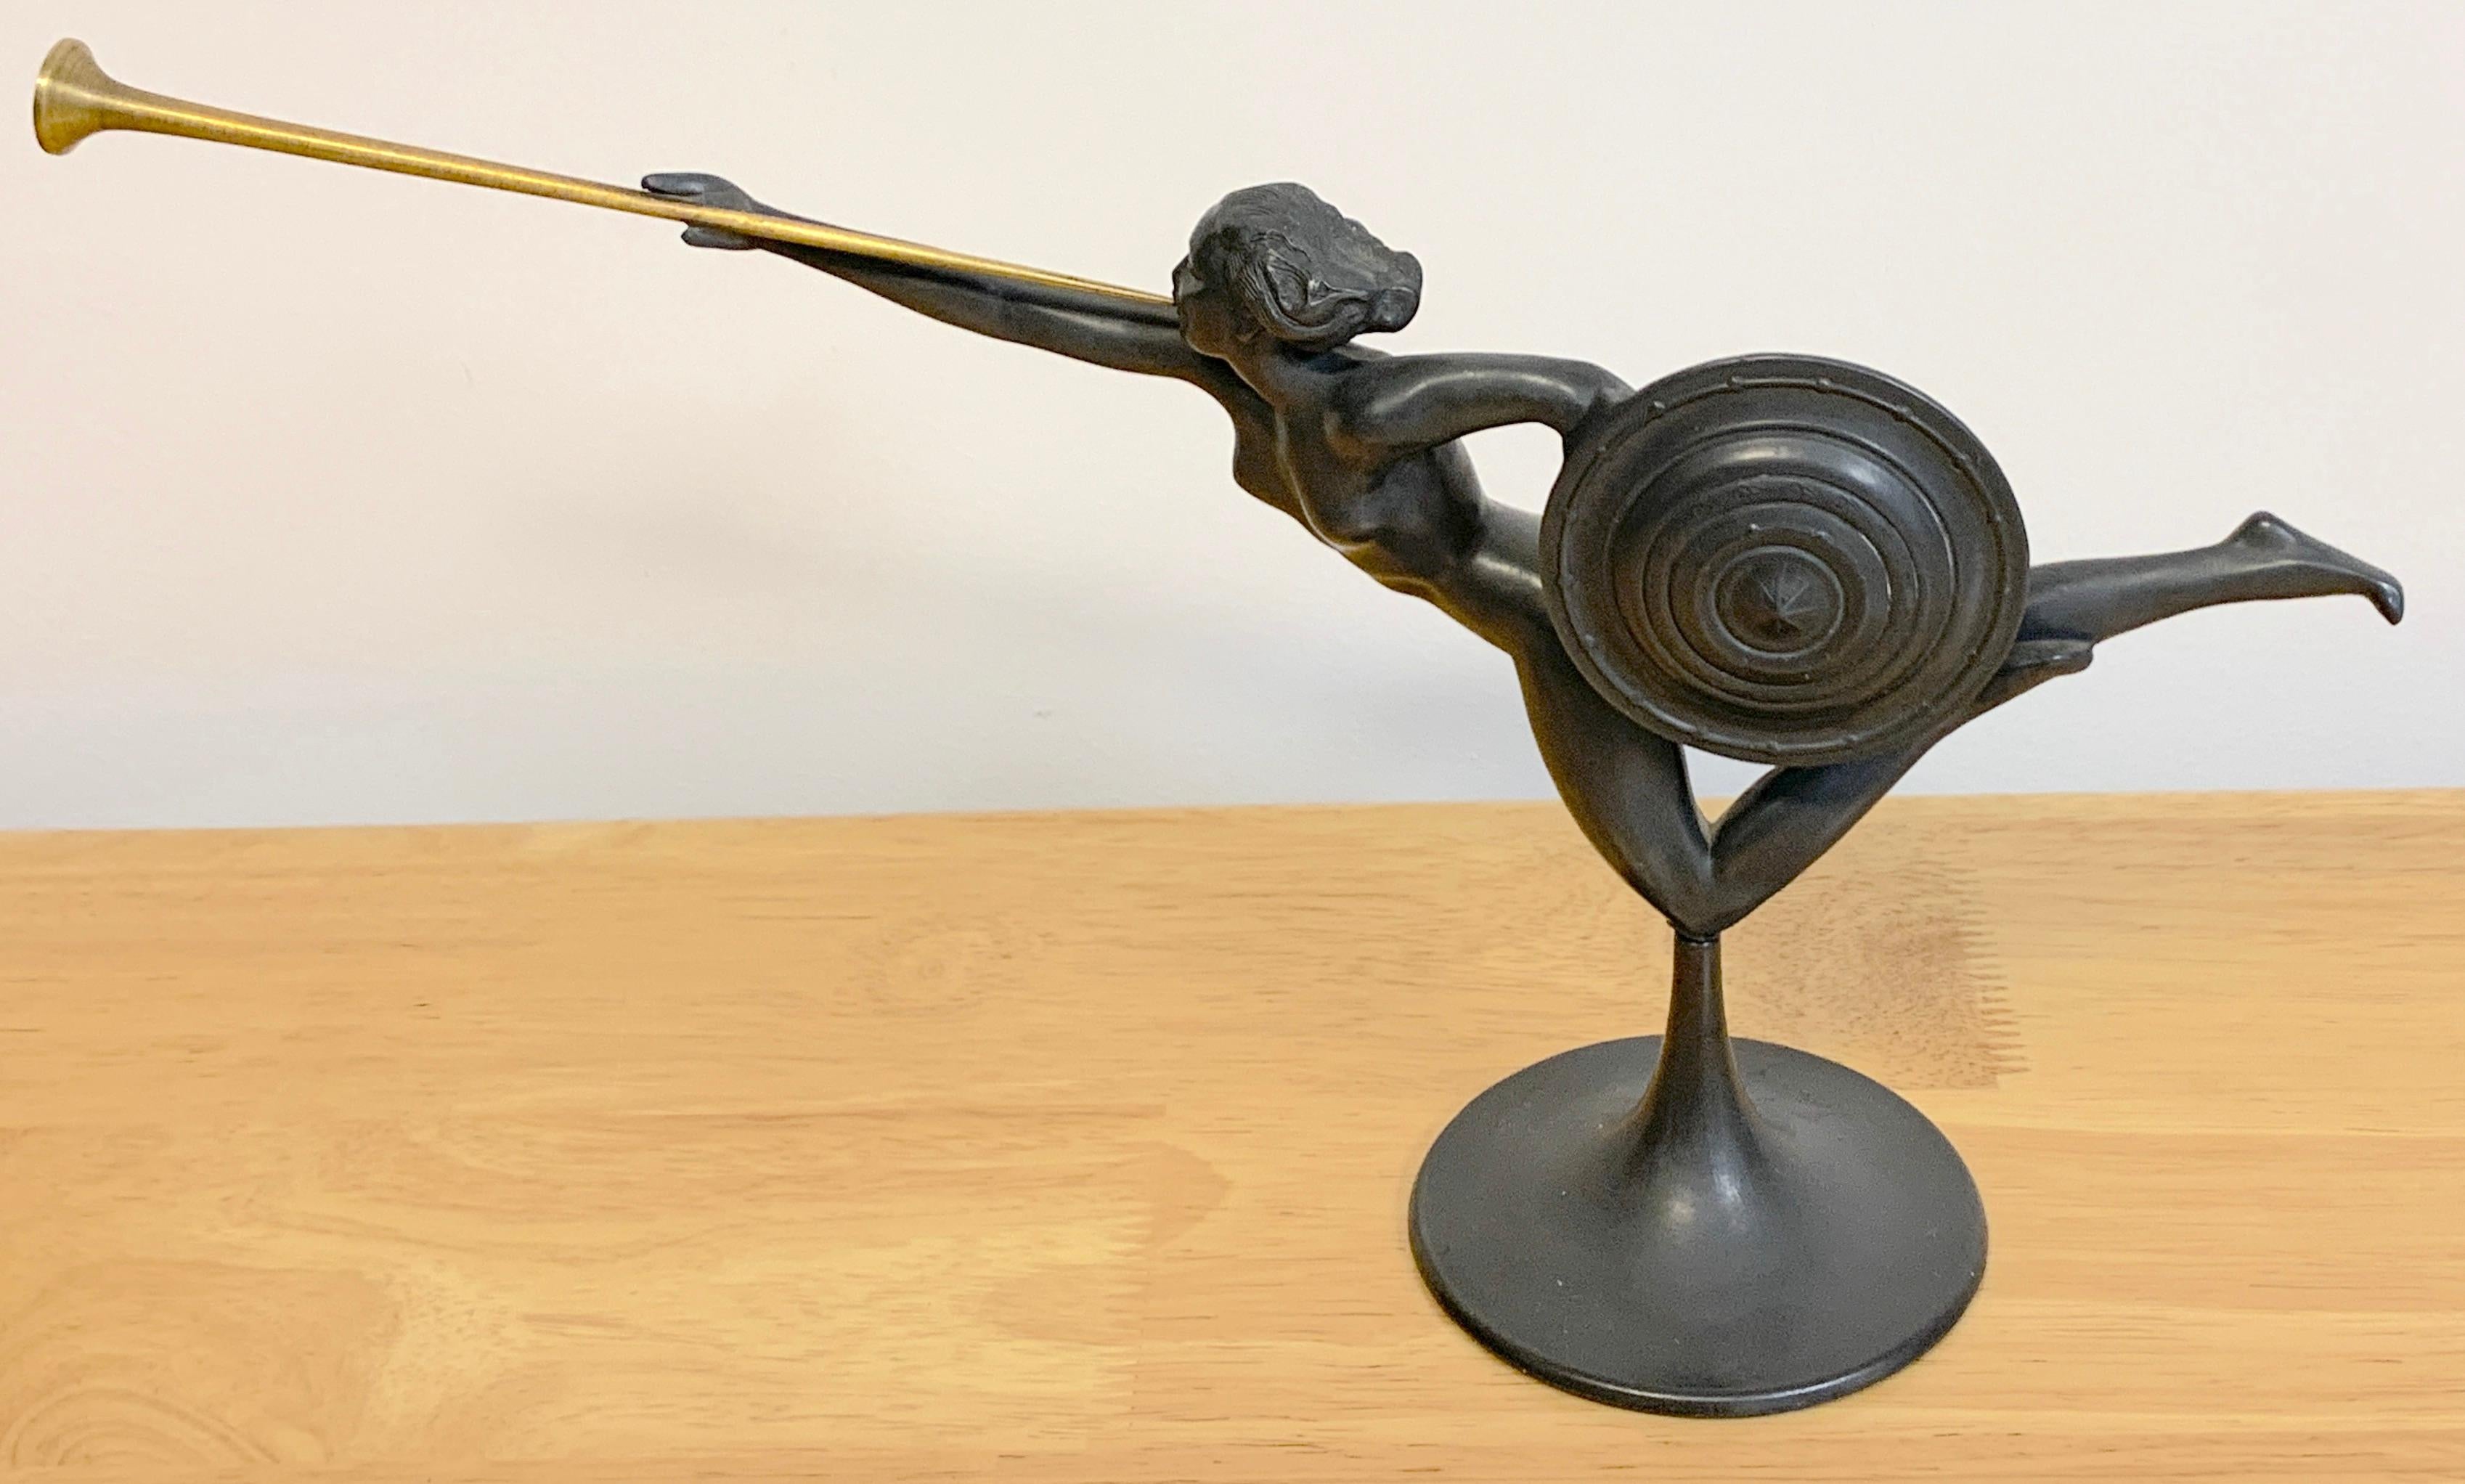 Art Deco German Pewter & Brass Allegory Sculpture Attributed to Kayserzinn
Germany, circa 1925

In two parts, the floating female nude warrior holding a shield and brass trumpet, raised on a round pedestal base. Unmarked.